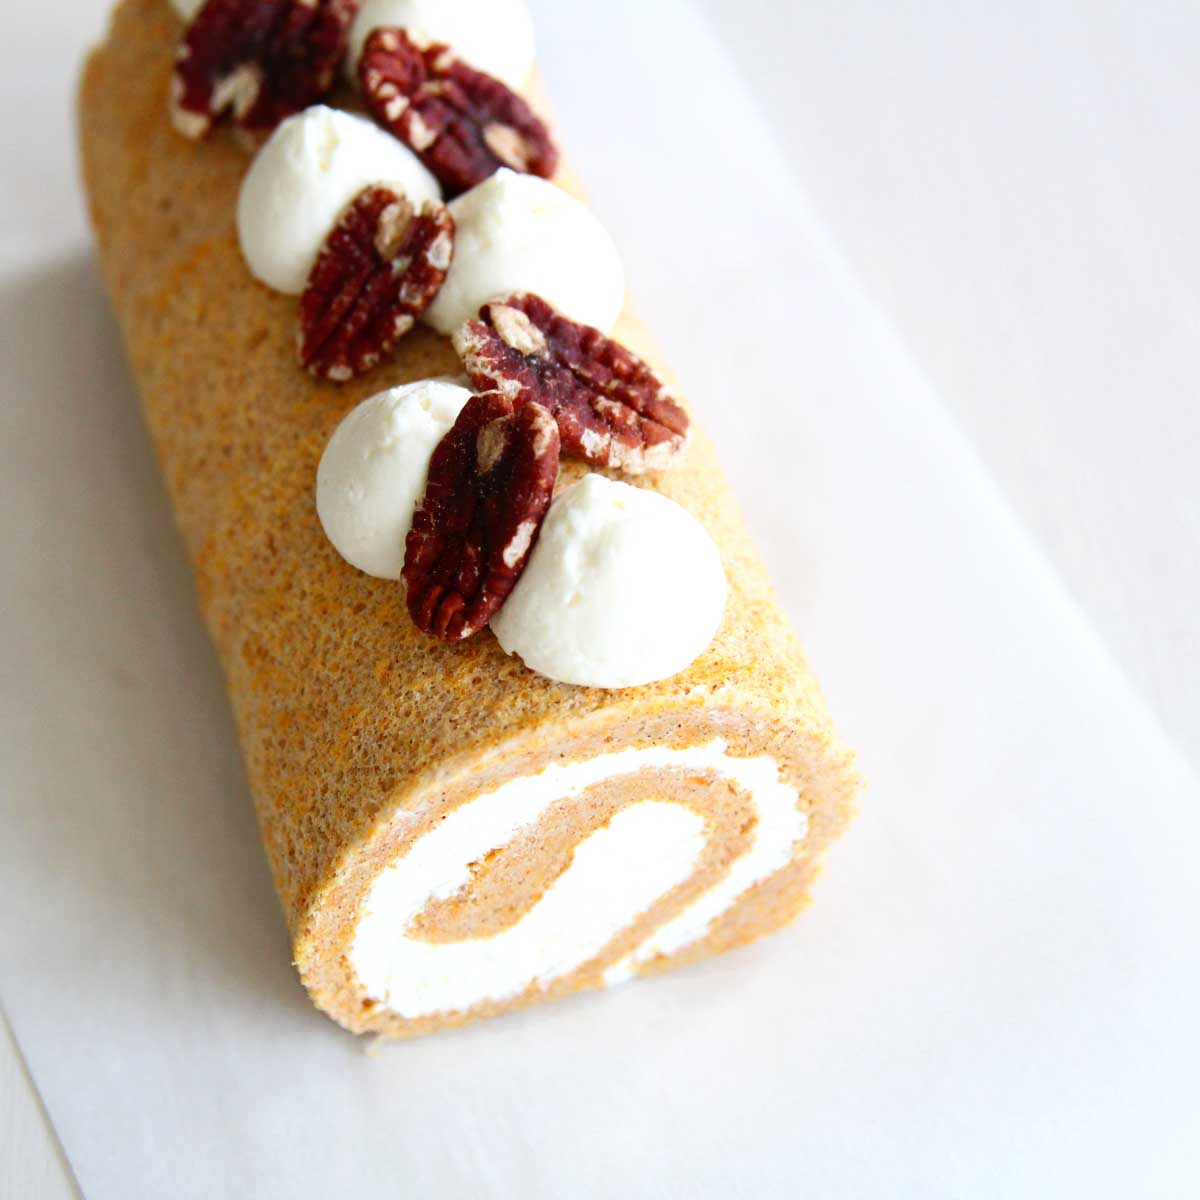 Flourless Sweet Potato Swiss Roll Cake (Lower Carb, Lower Calorie Recipe) - Strawberry Japanese Roll Cake